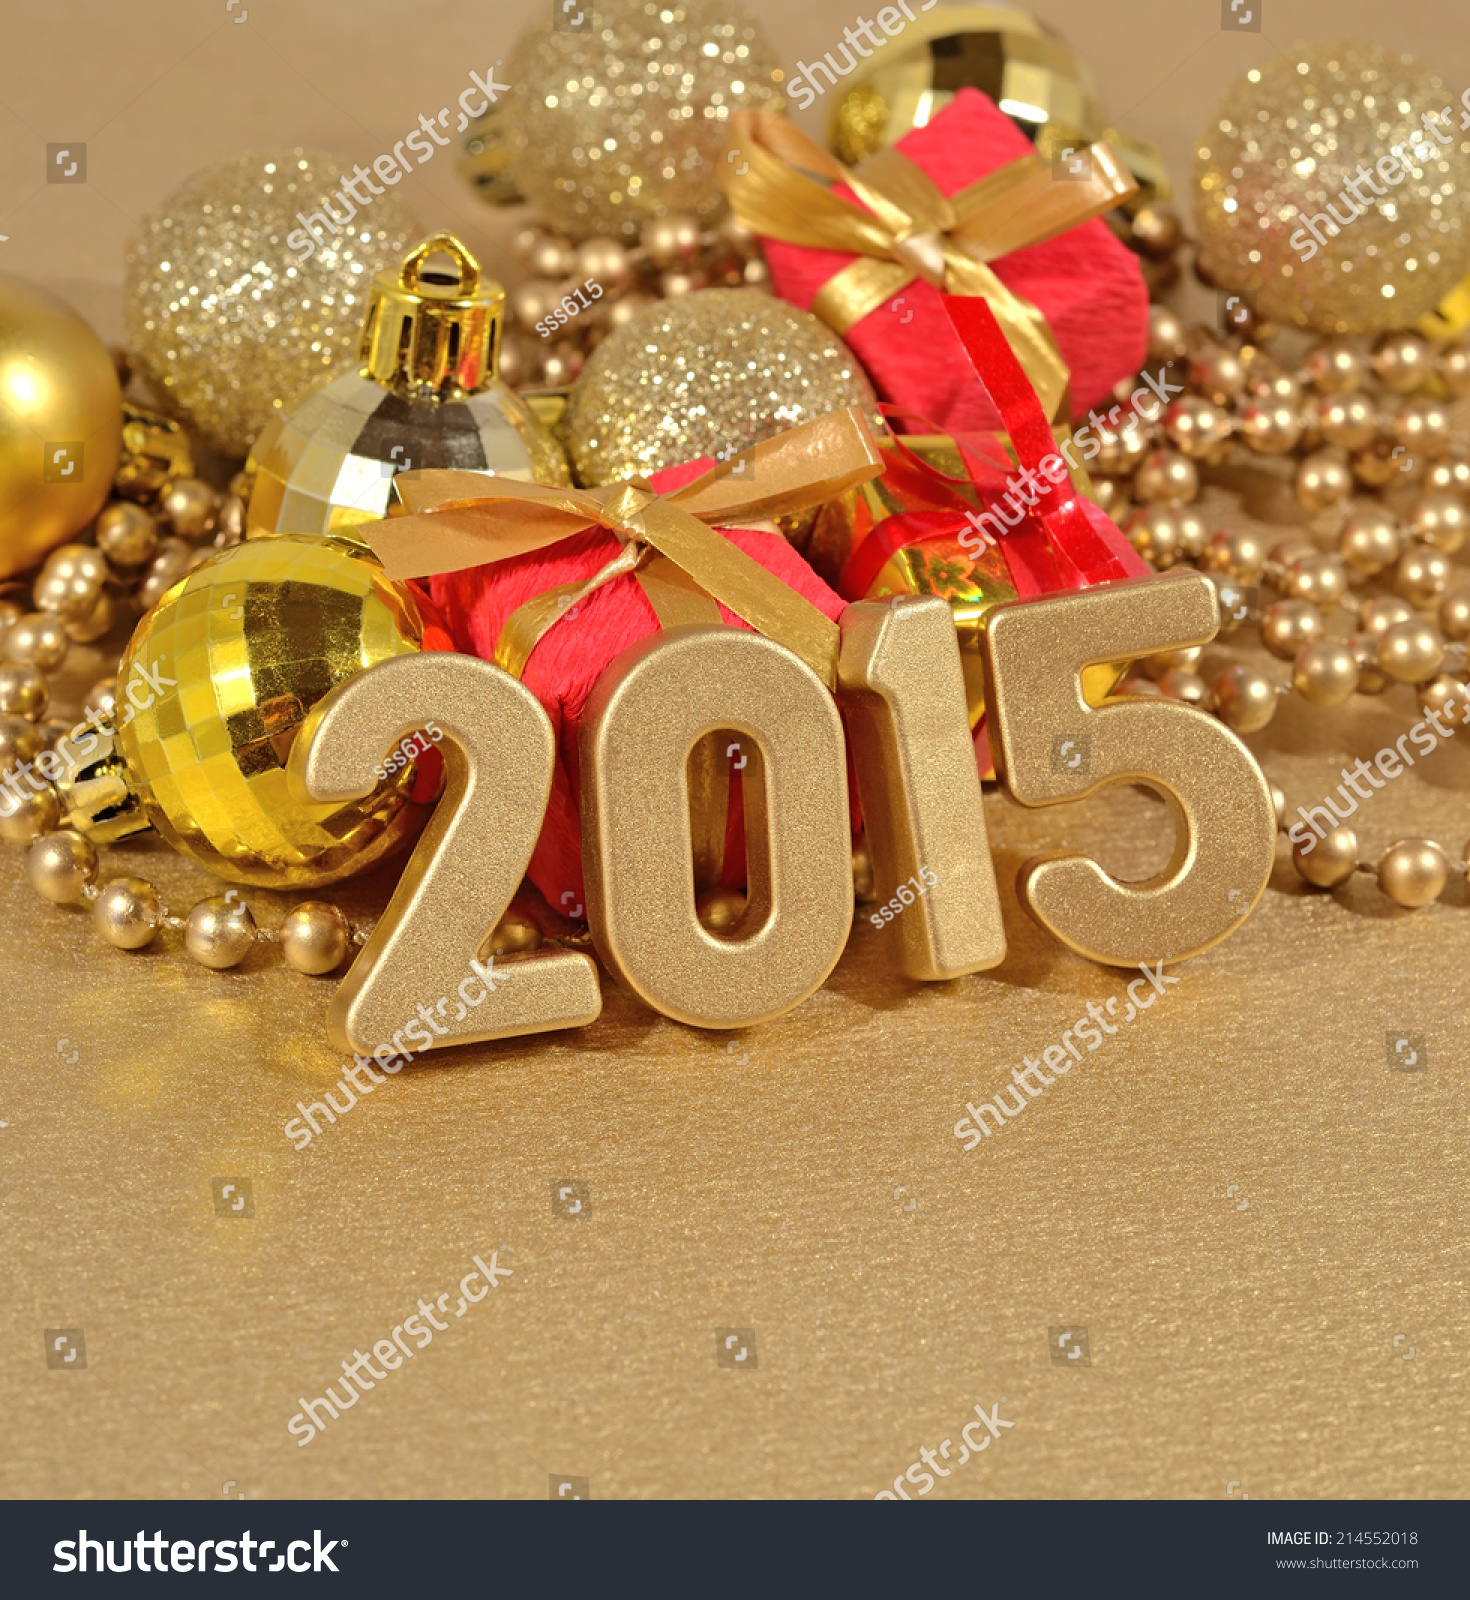 2015 year golden figures on the background of christmas decorations #214552018